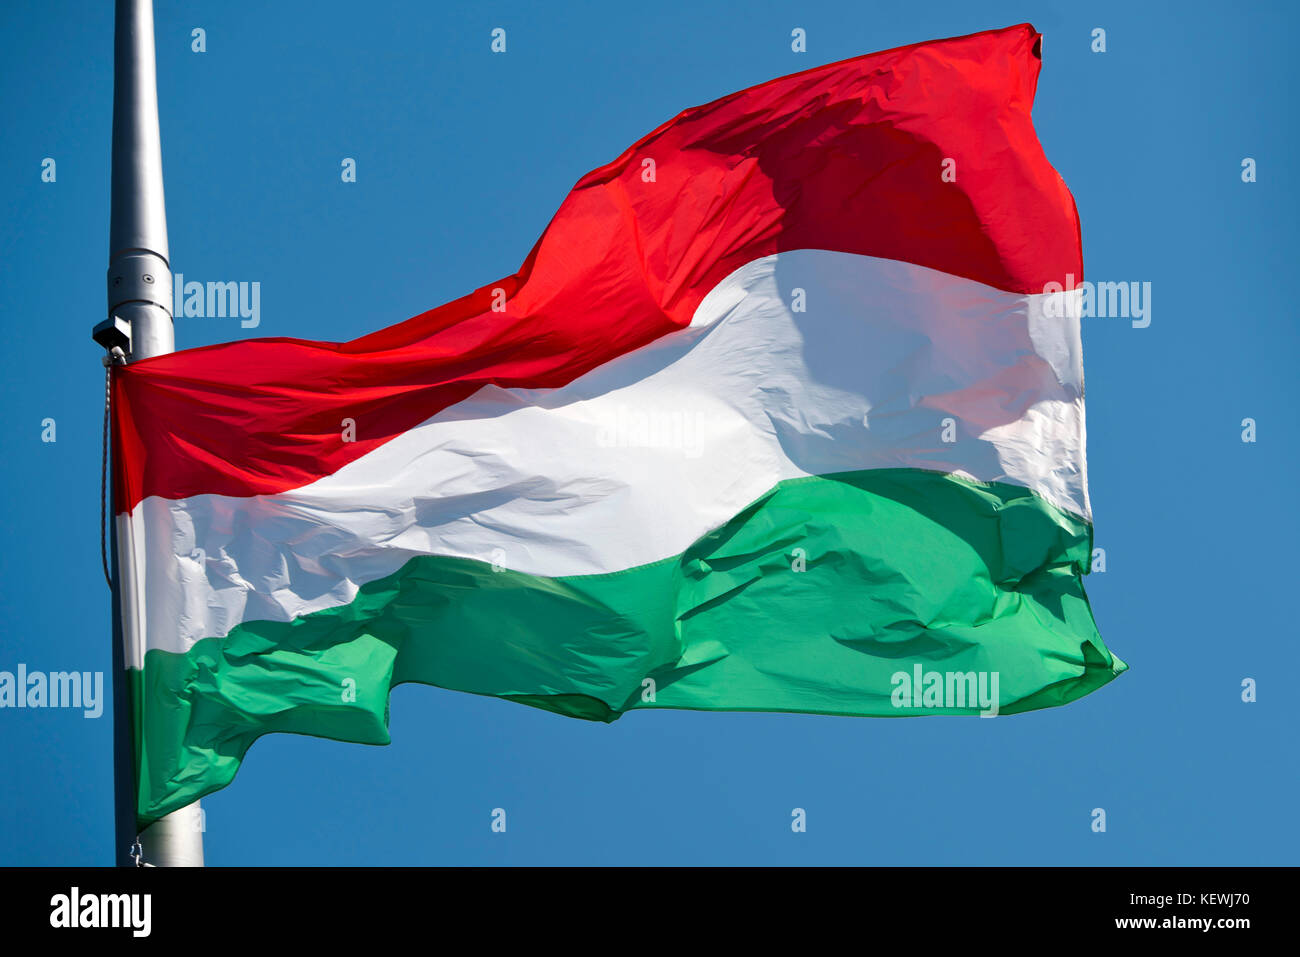 Horizontal close up view of the official Hungarian flag. Stock Photo